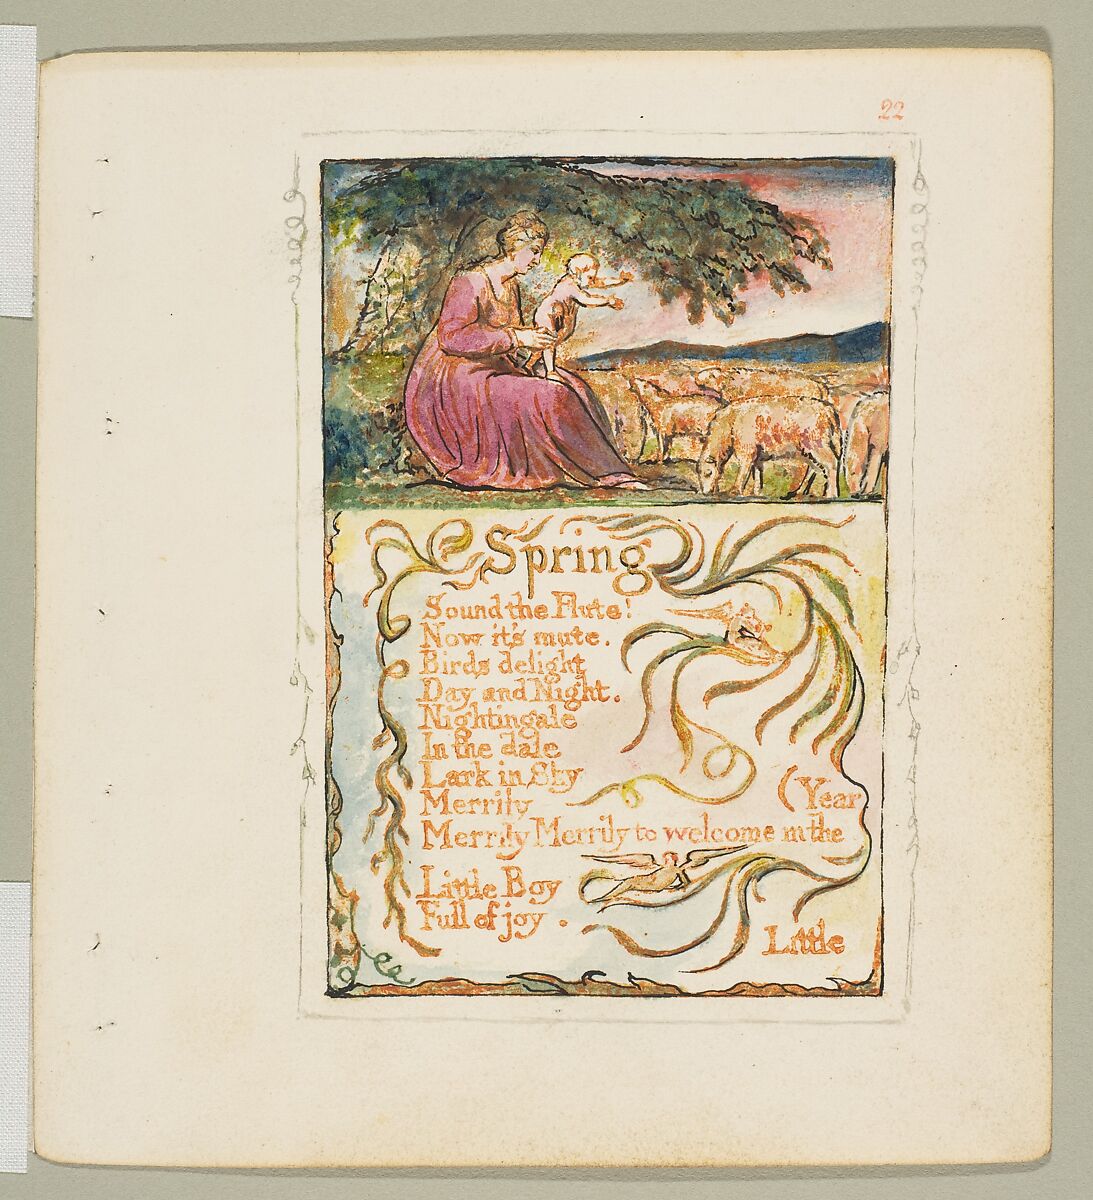 Songs of Innocence: Spring, William Blake  British, Relief etching printed in orange-brown ink and hand-colored with watercolor and shell gold